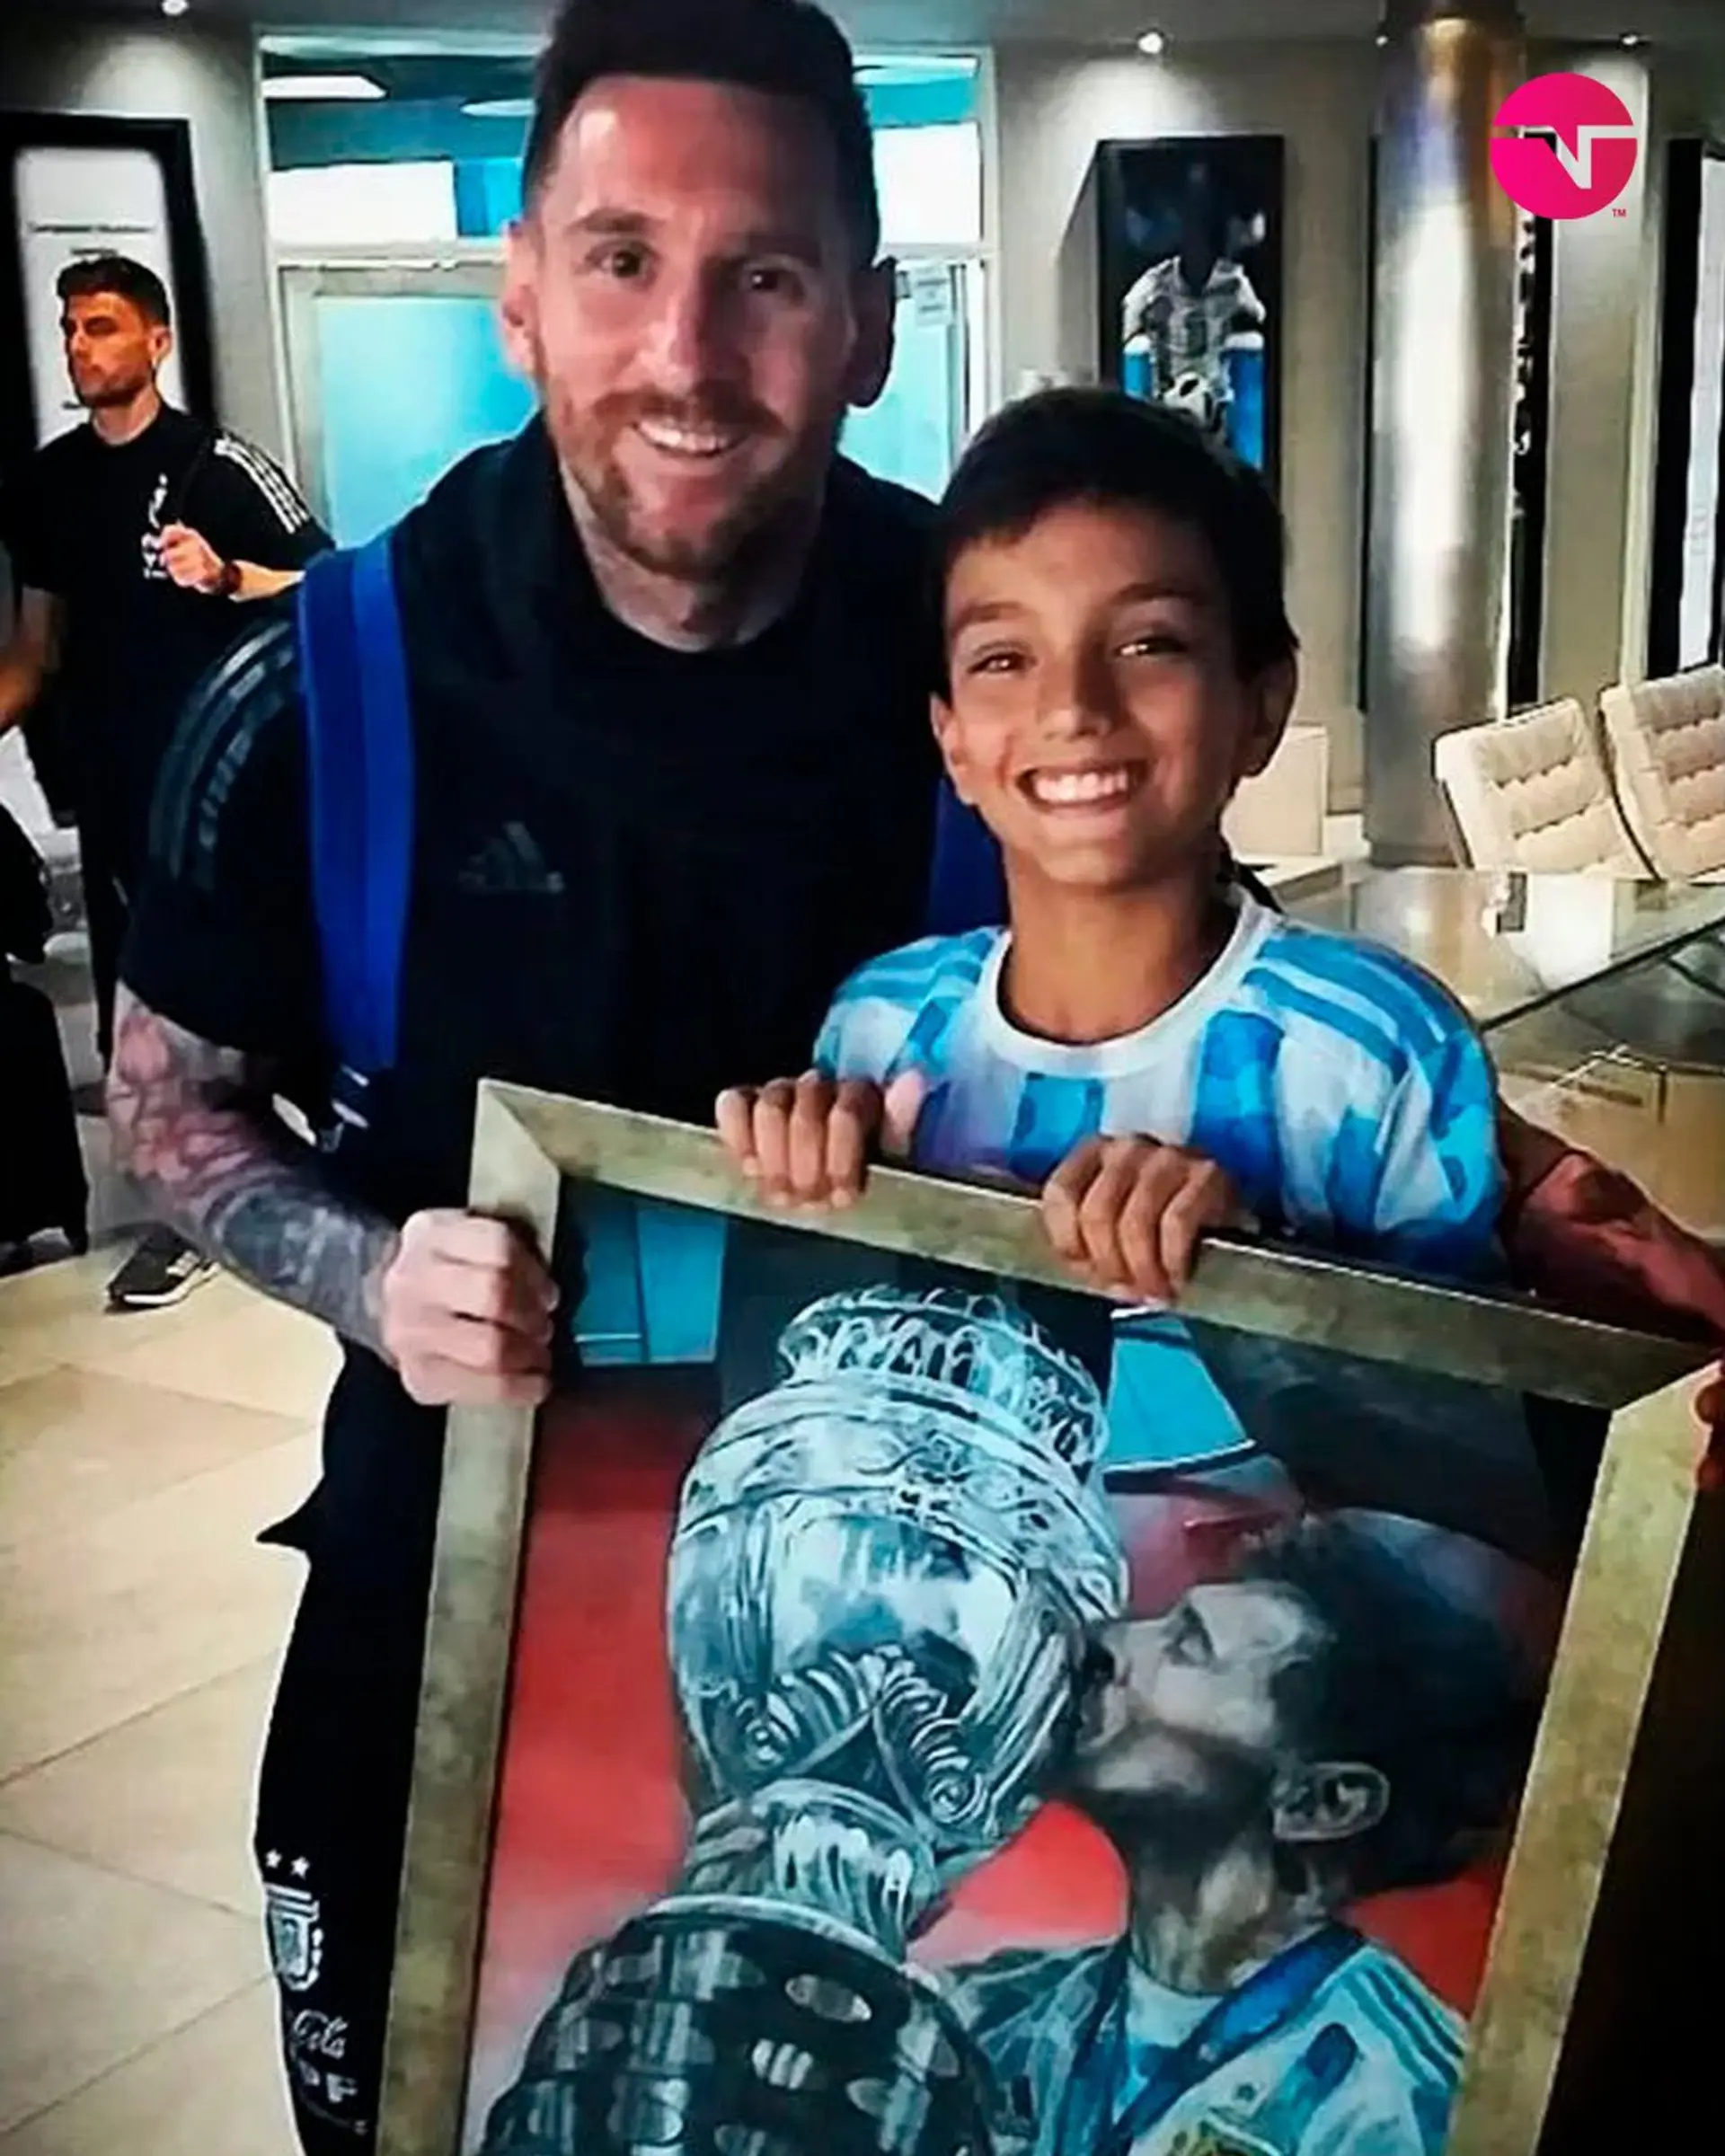 c827b88d e8f0 4b16 8591 9b850a9576da?width=1920&quality=75 'Did you seriously do it yourself?': Messi receives special gift from young fan